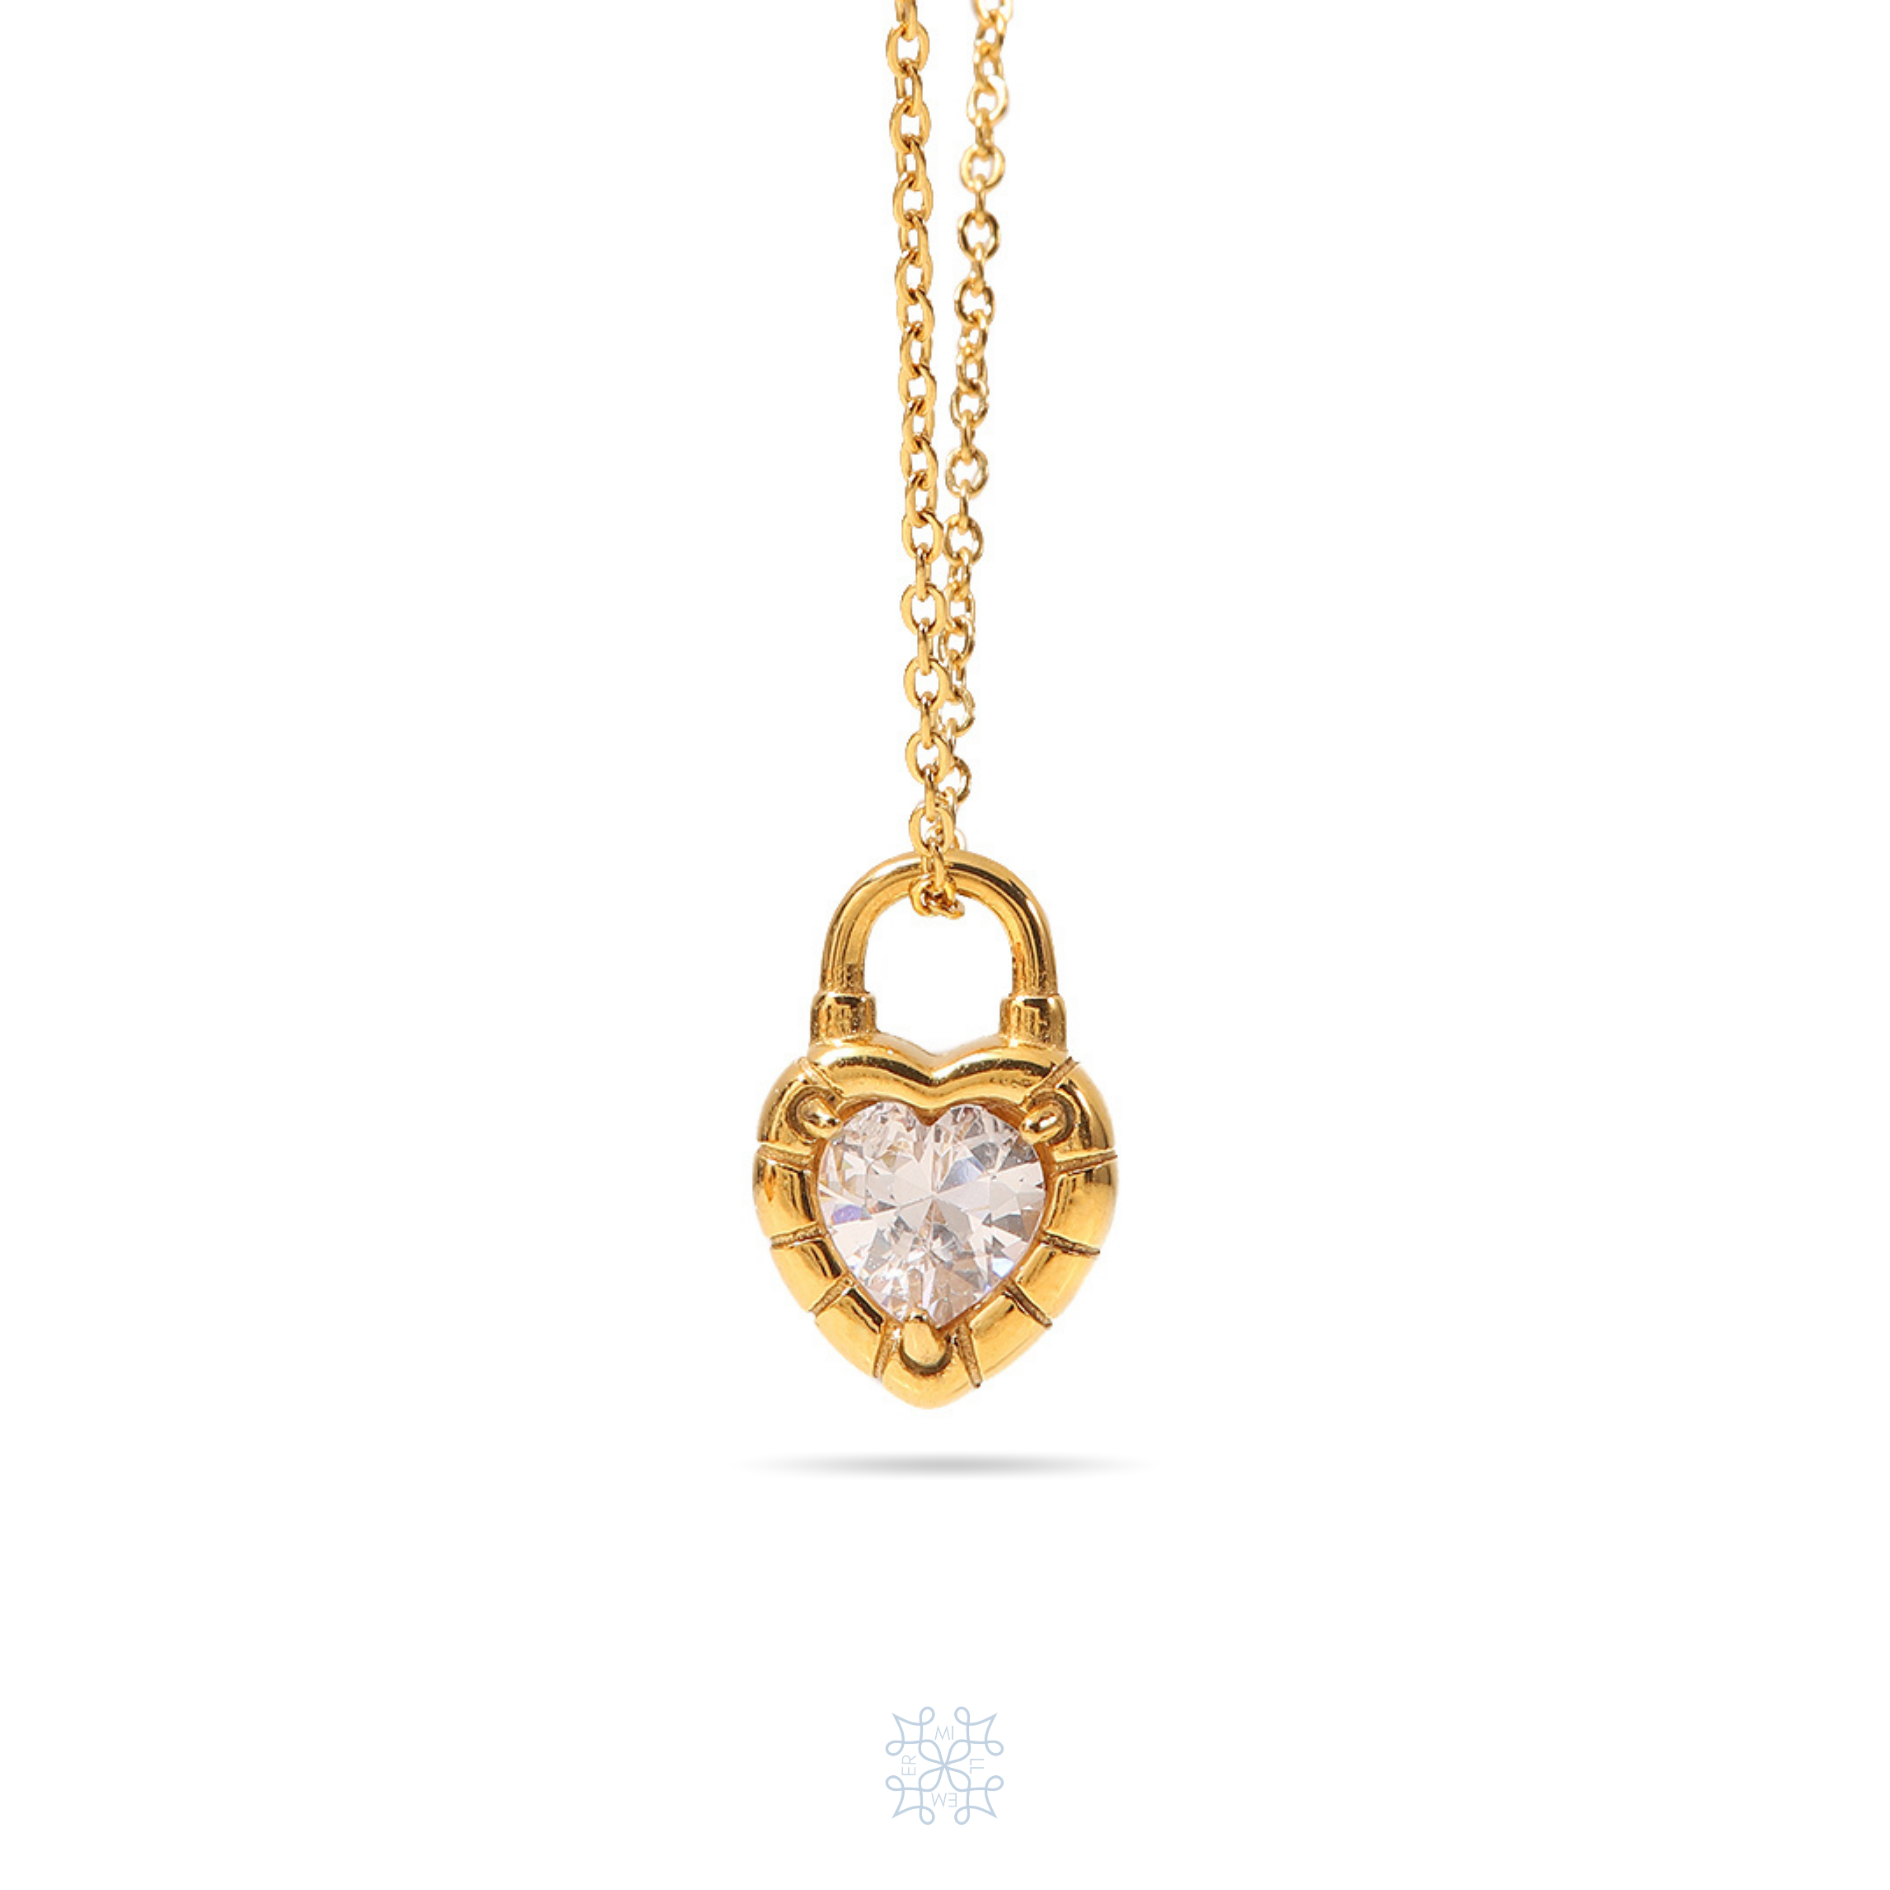 HEARTLOCK Zircon Pendant Gold Necklace. Gold chain with a locker pendnat in the form of a heart. In the middle of the gold heart pendnat is a white zircon stone.